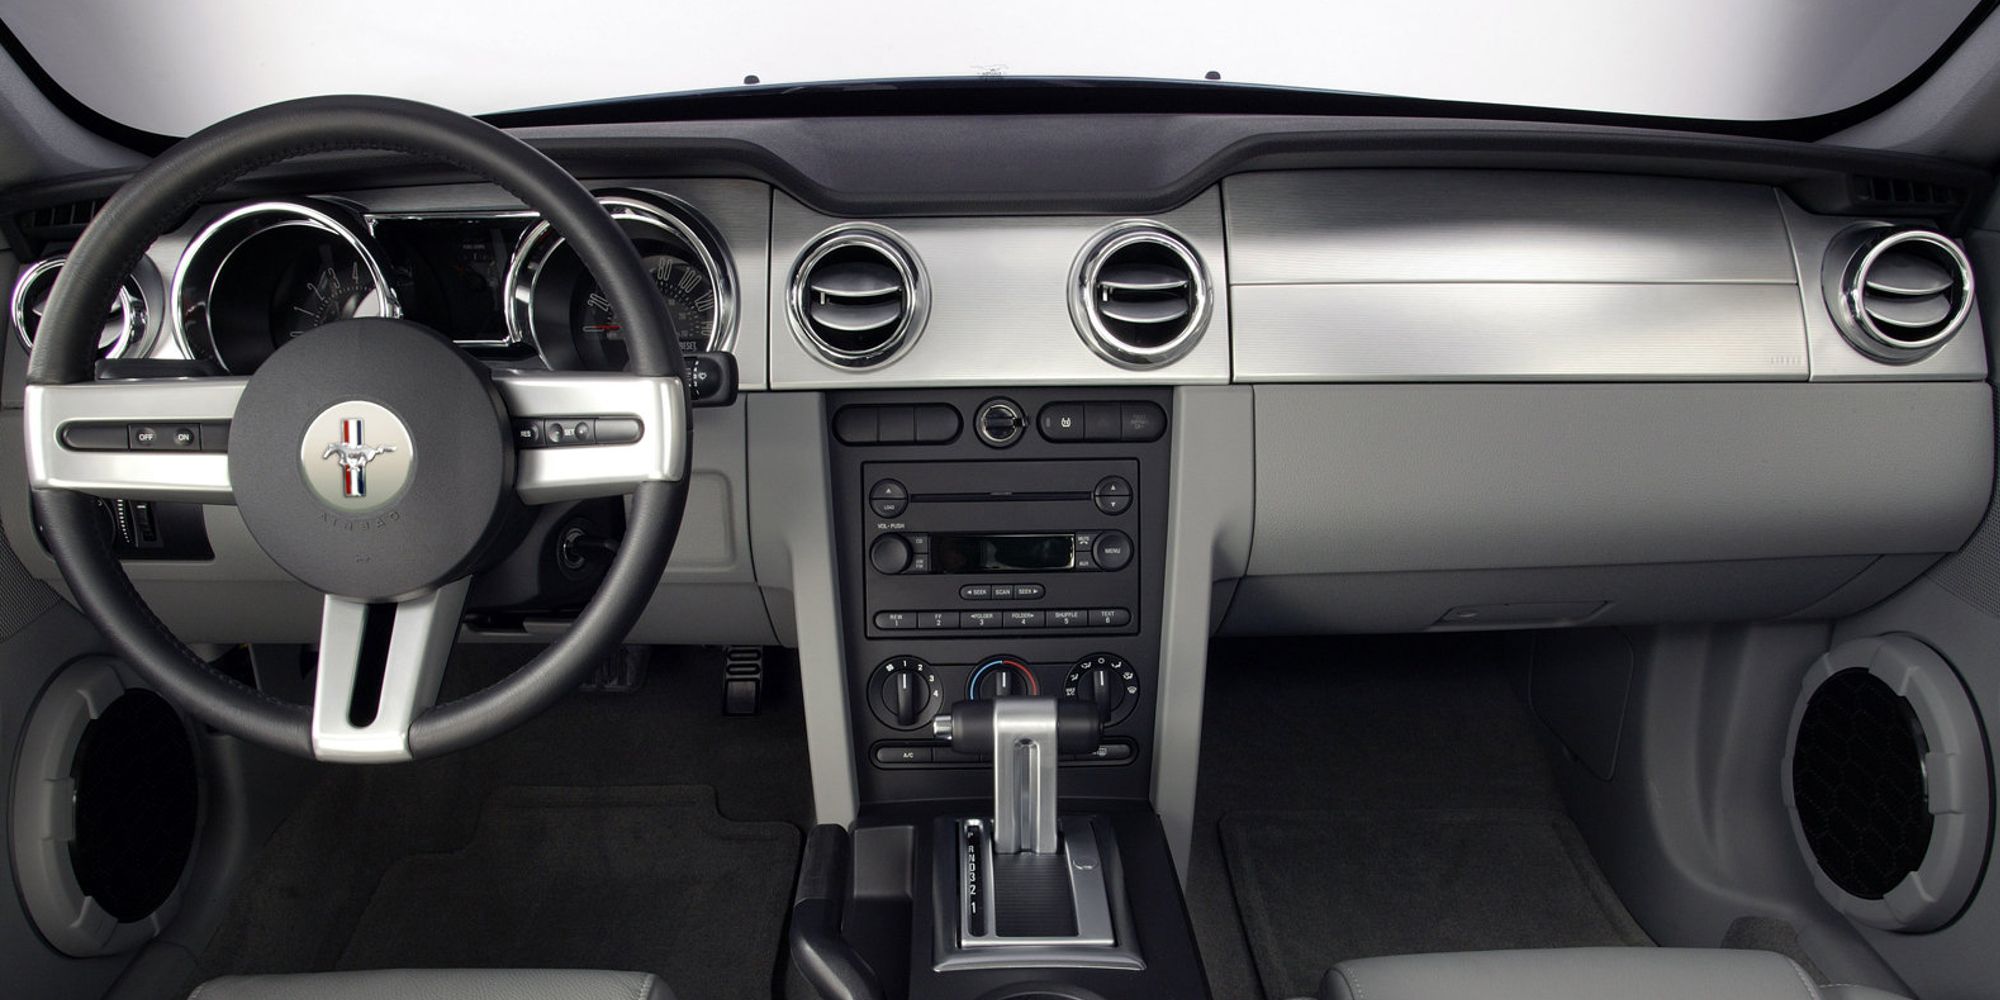 The interior of a S197 Mustang